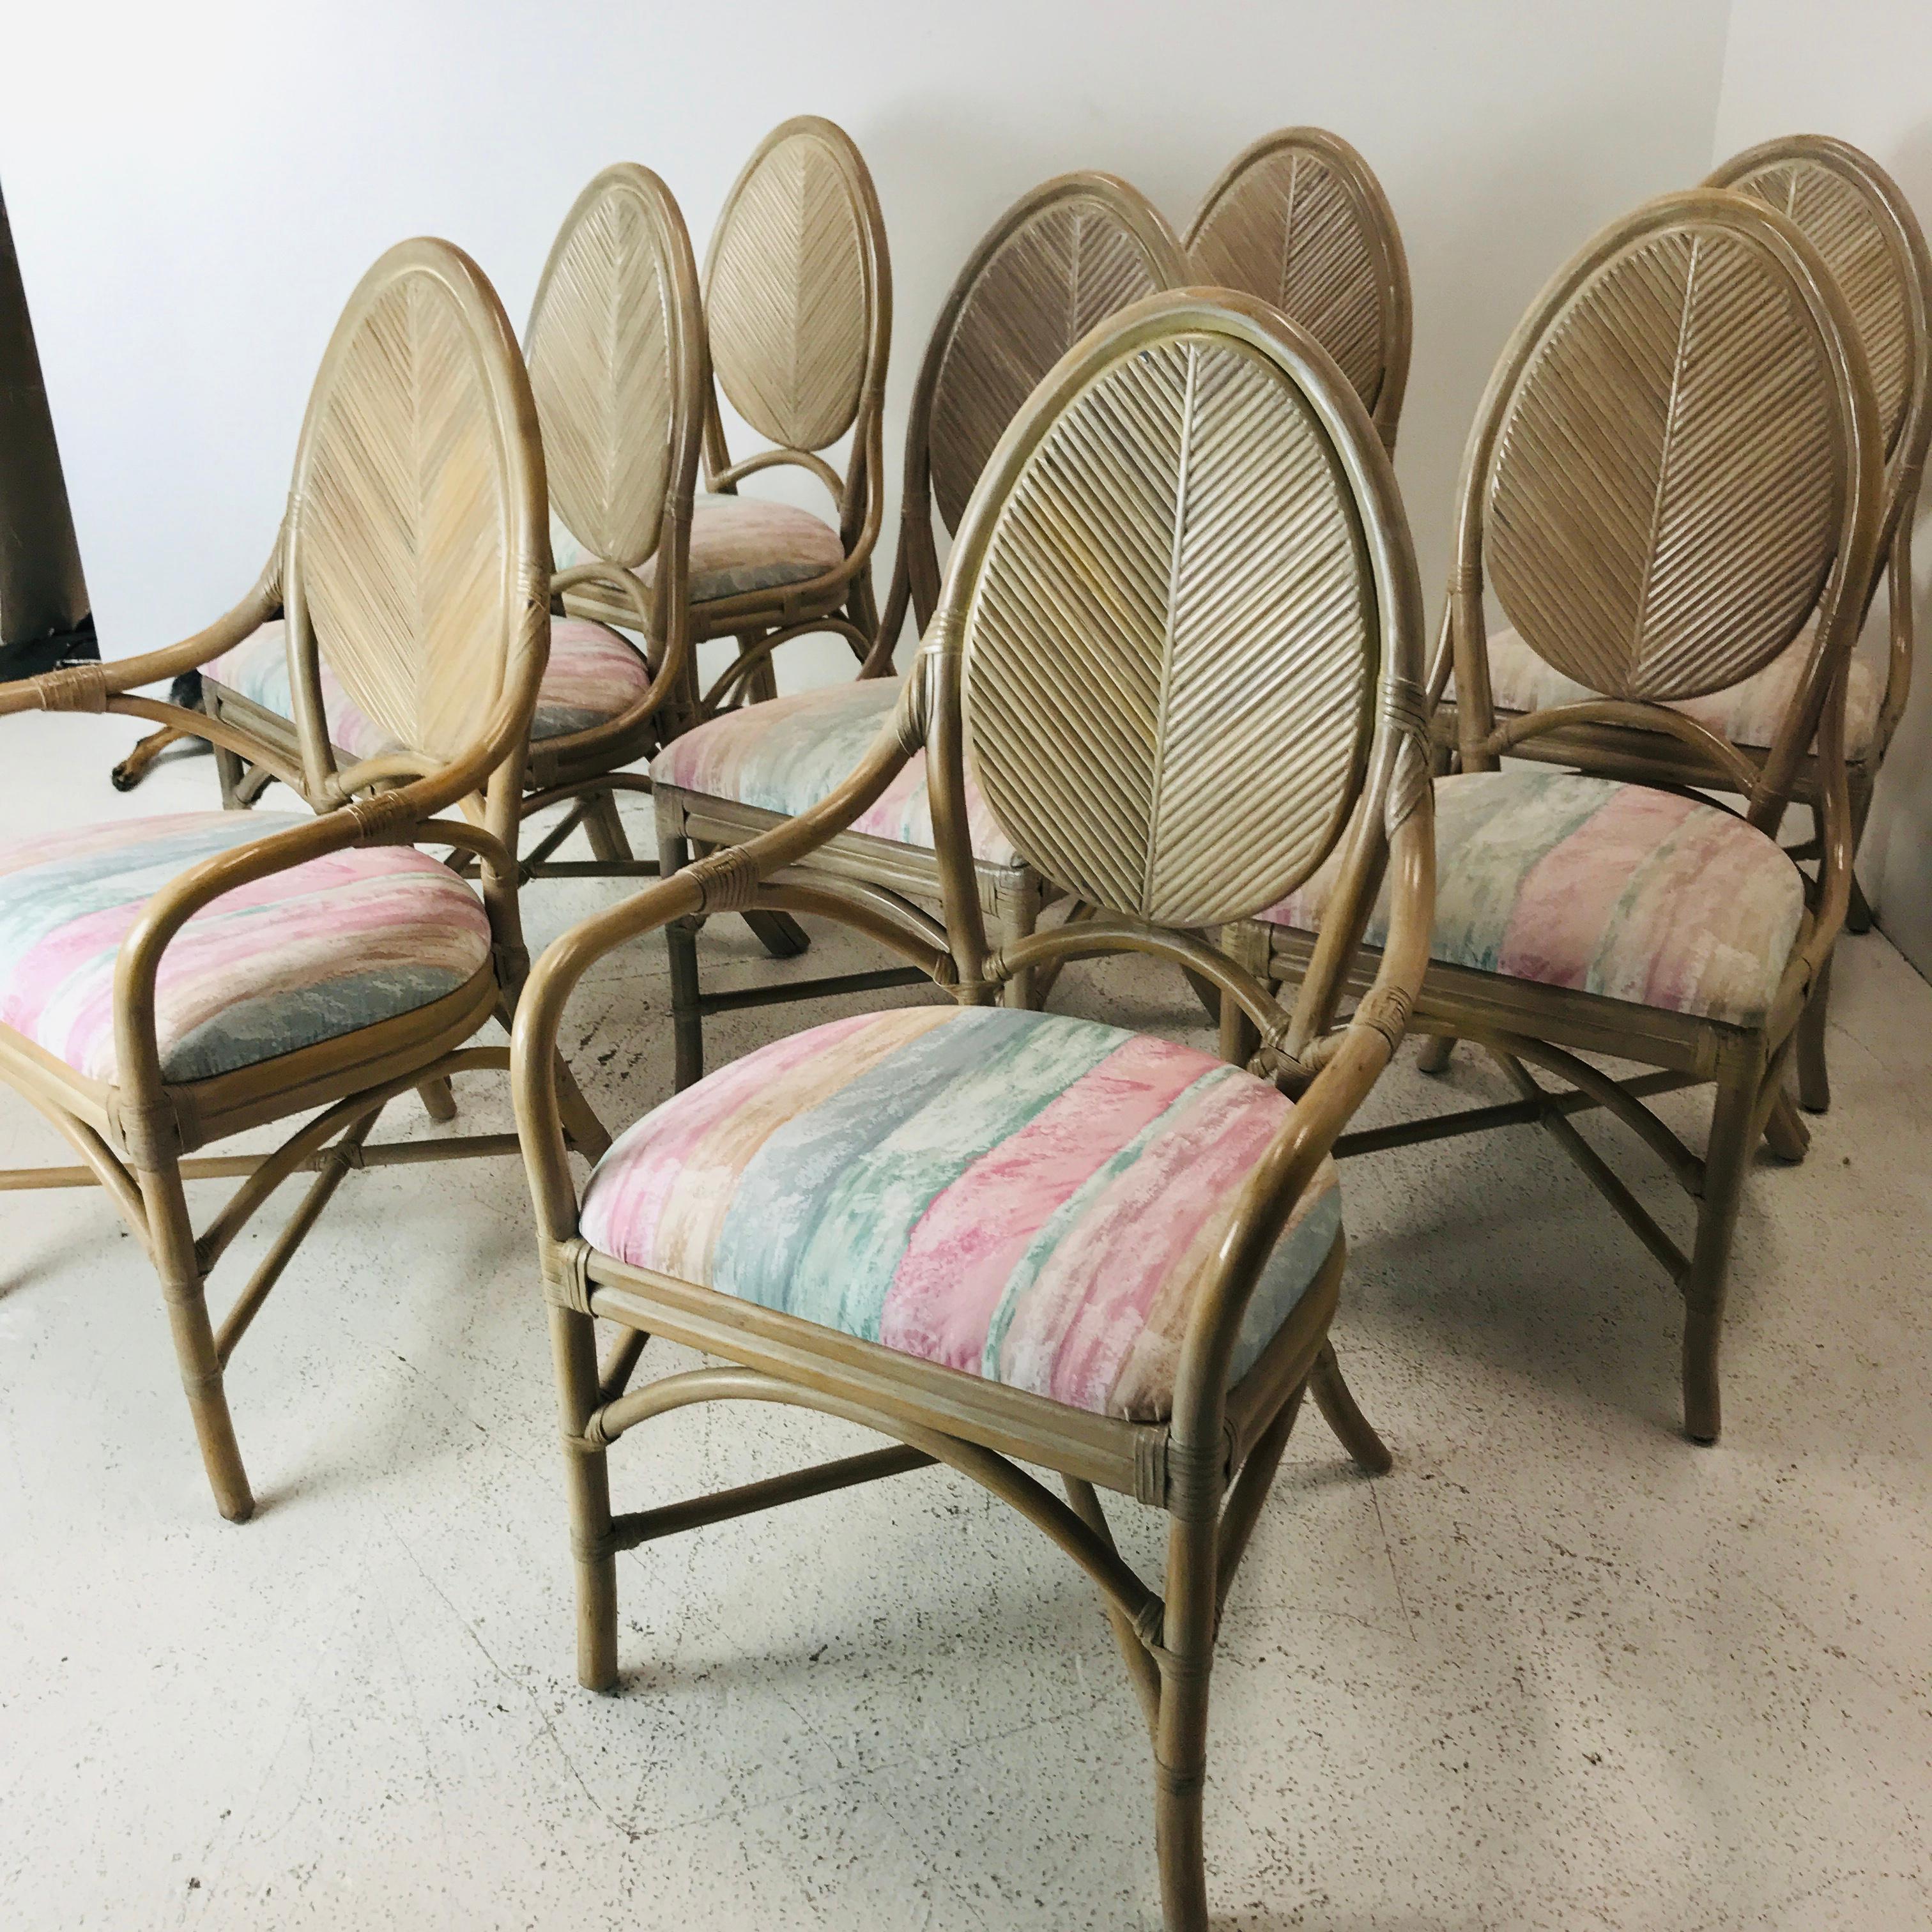 8 McGuire lacquered rattan dining chairs (2 armchairs and 6 side chairs) with floral upholstered seats. Table includes unique split bamboo spiral base with 60